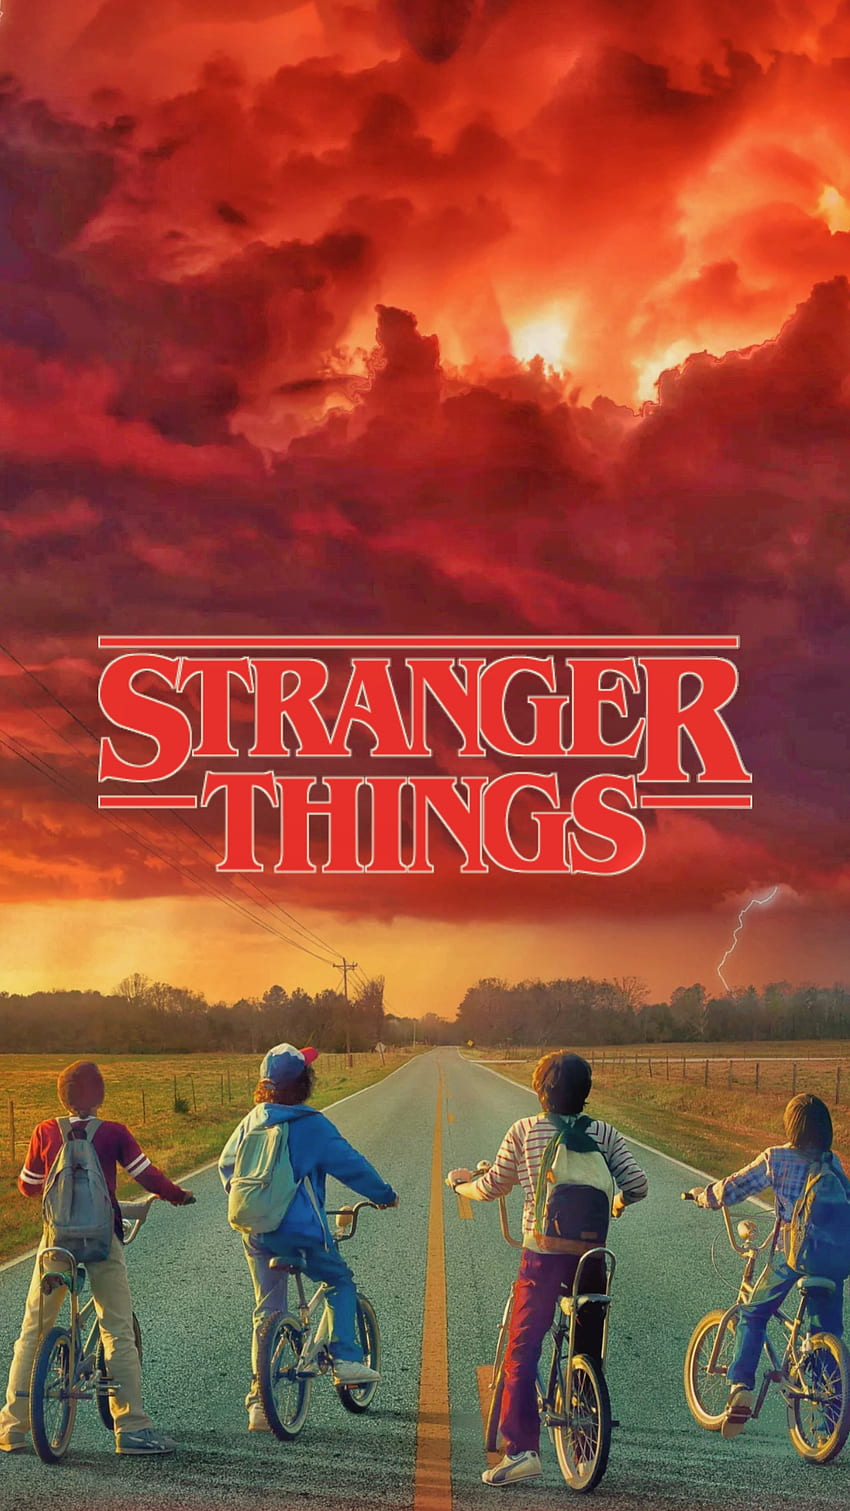 270 Stranger Things HD Wallpapers and Backgrounds